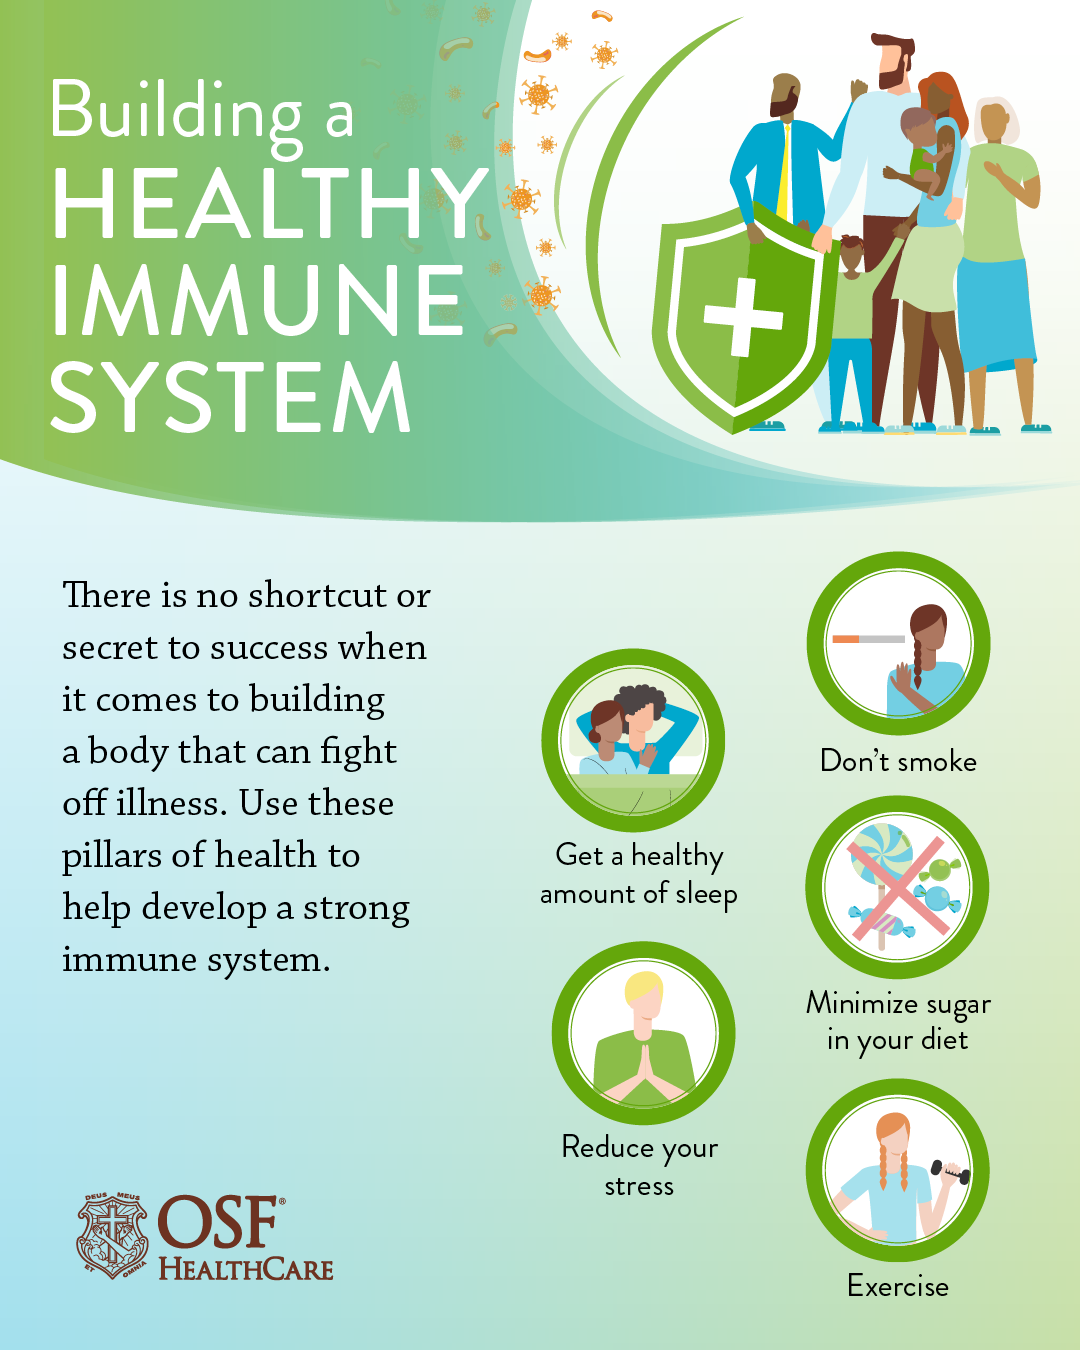 How do I know I have a strong immune system?